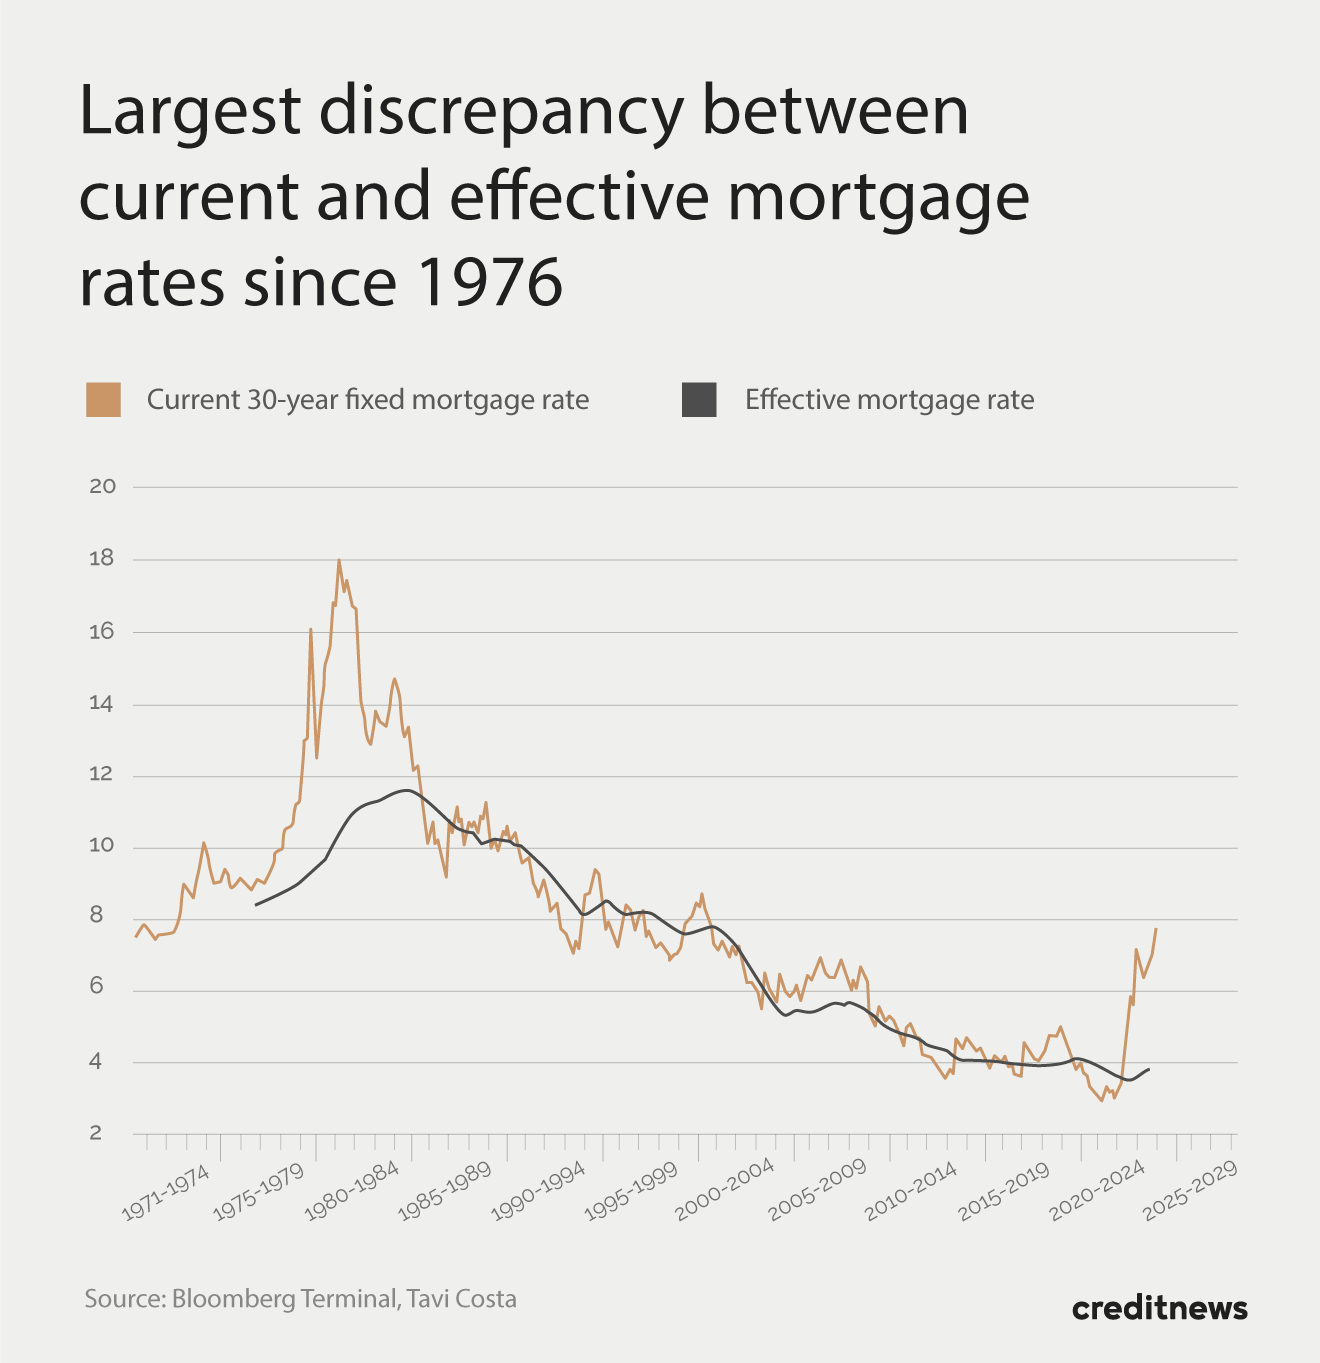 graph showing largest discrepancy between current and effective mortgage rates since 1976